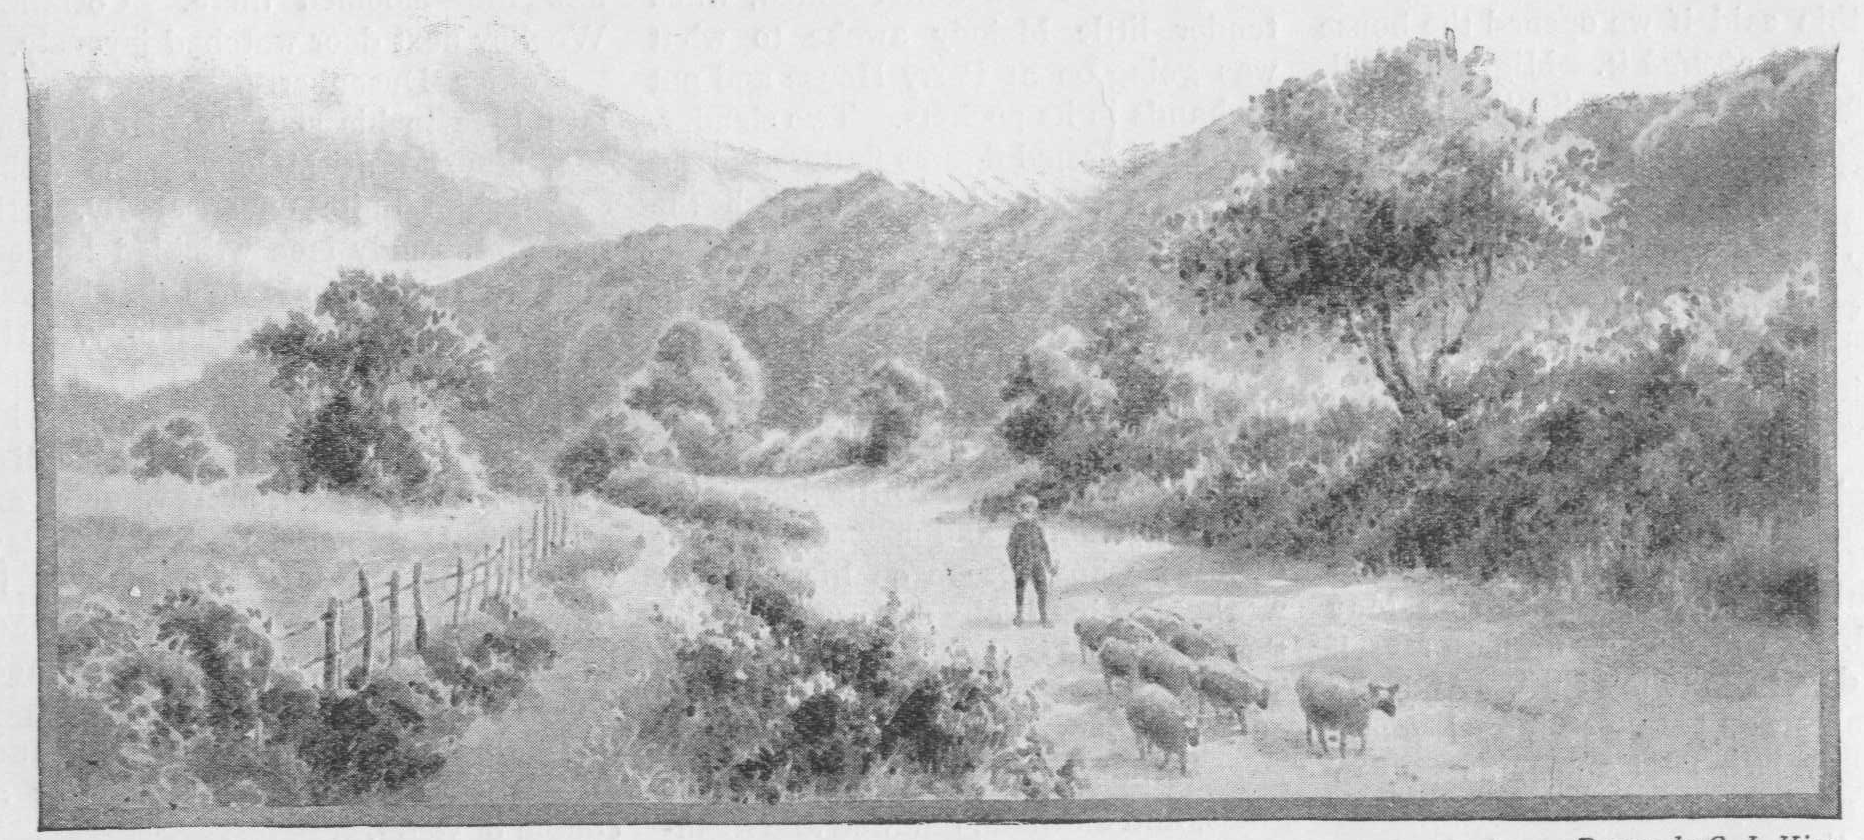 man herding sheep on a hilly country road